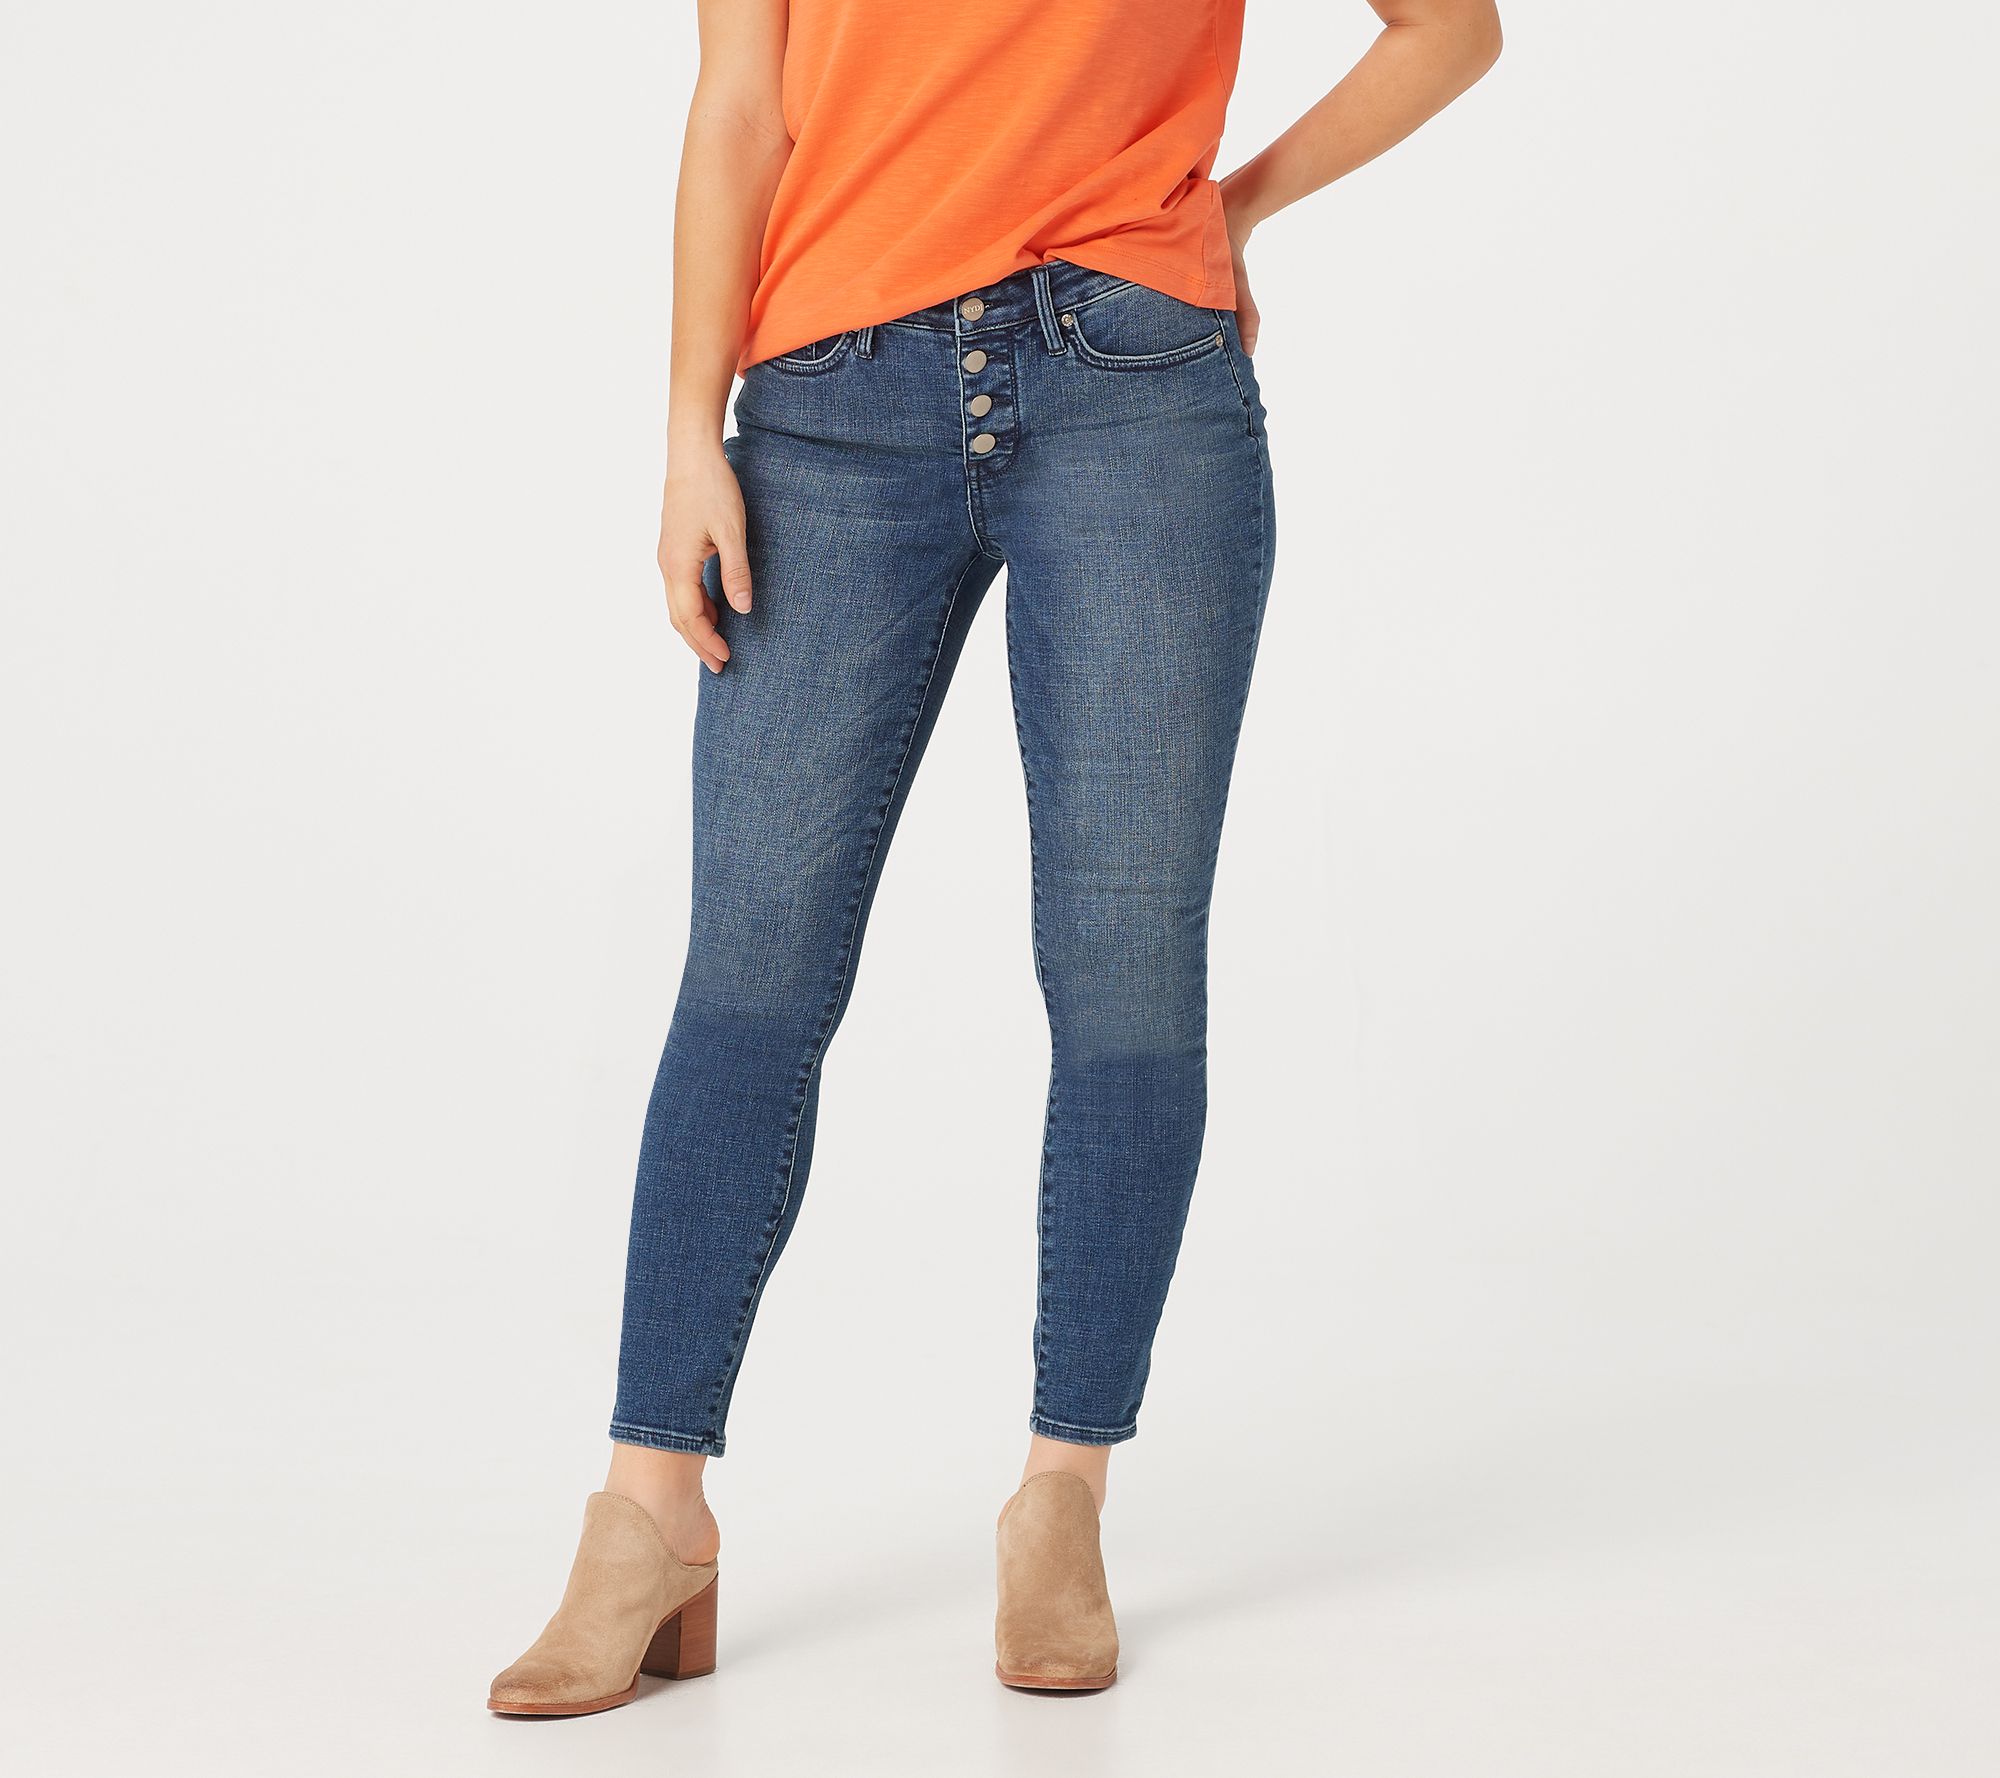 exposed button fly jeans womens Off 68%